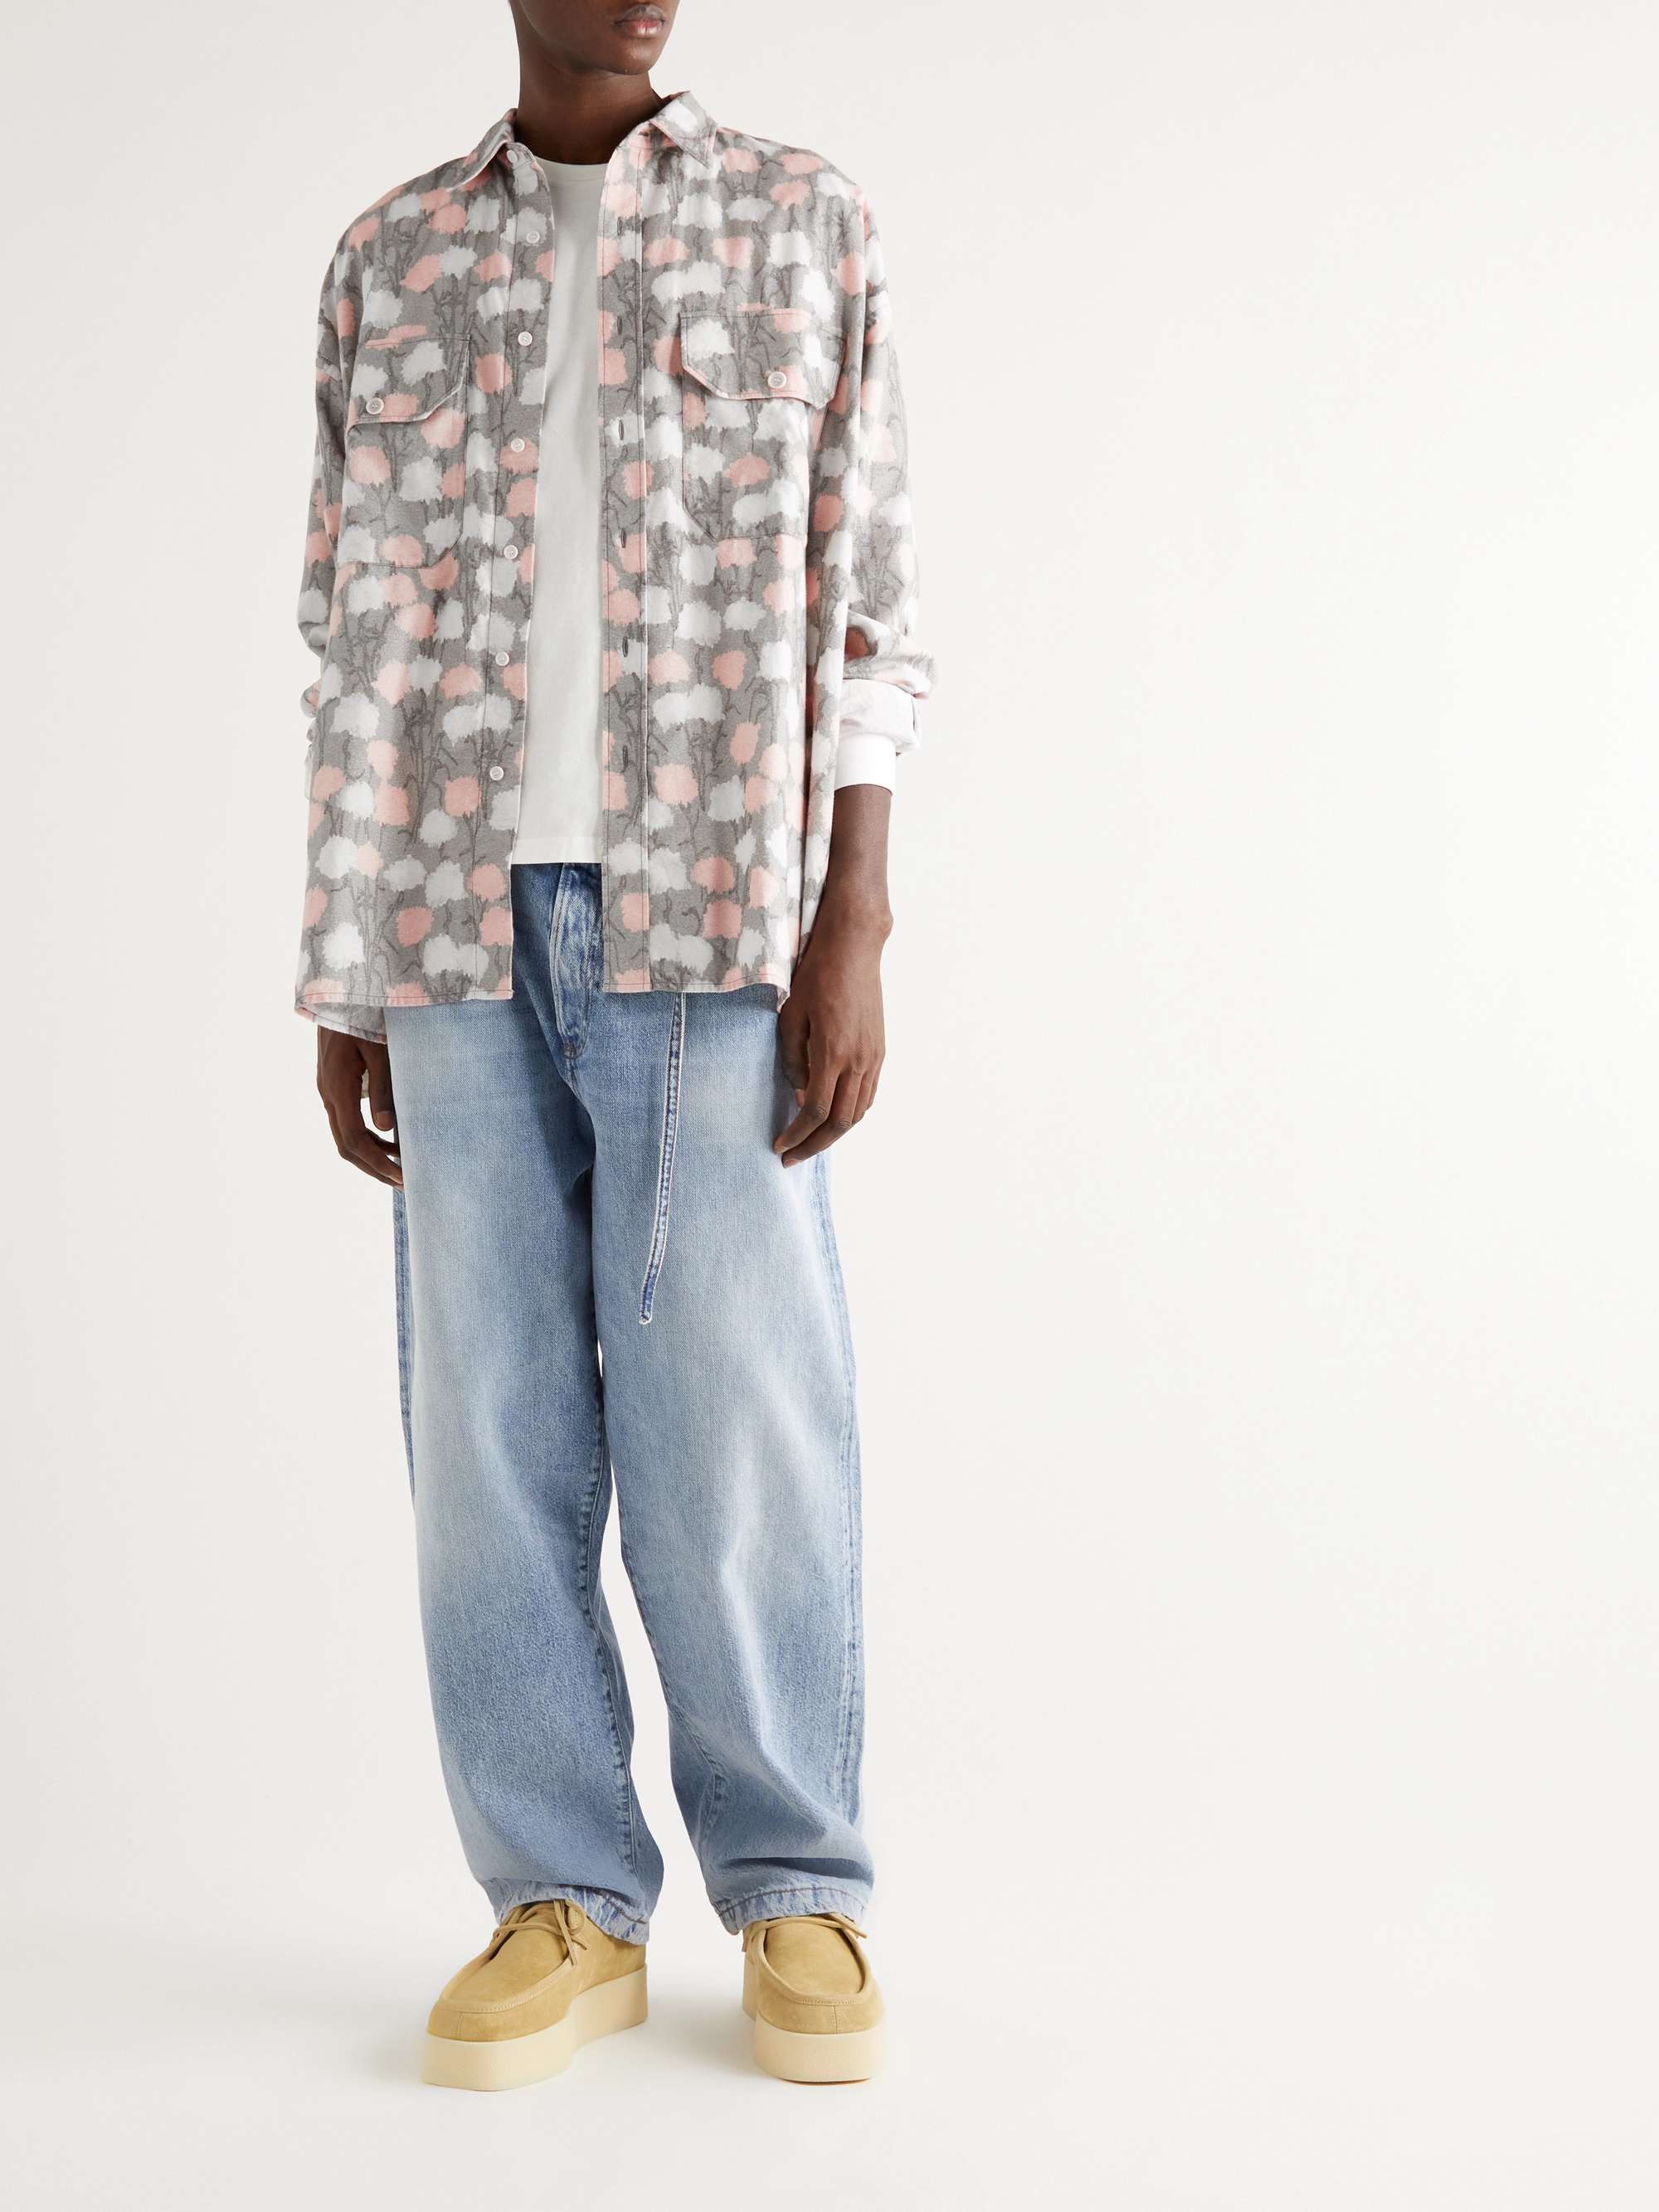 ACNE STUDIOS Oversized Printed Cotton-Flannel Shirt